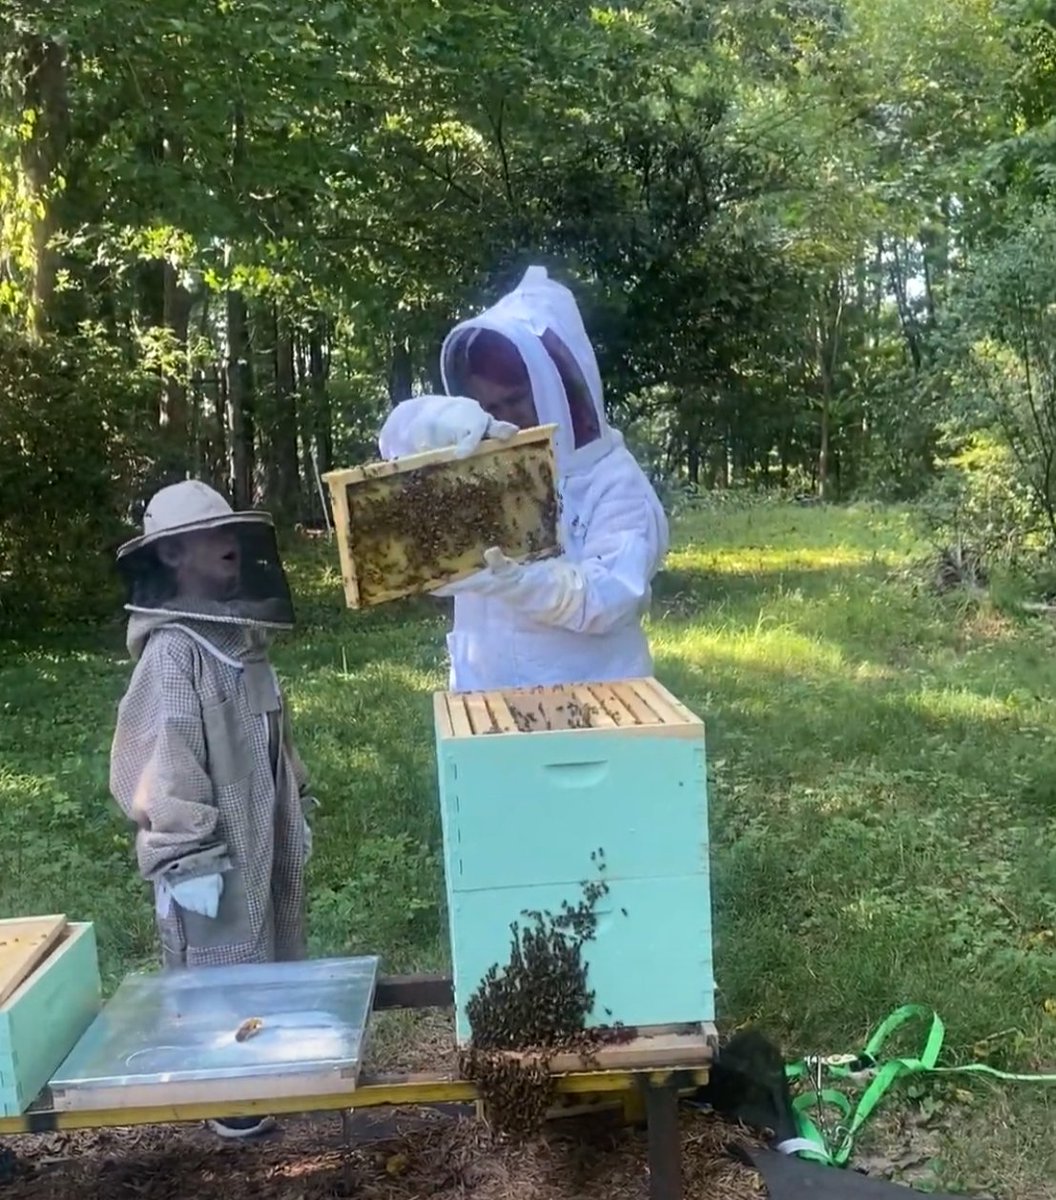 My son checking out the bees for the first time, he was more interested than he thought he was going to be. 

#beekeeping #beekeeper #bees #honeybees #bee #bonding #bondingtime